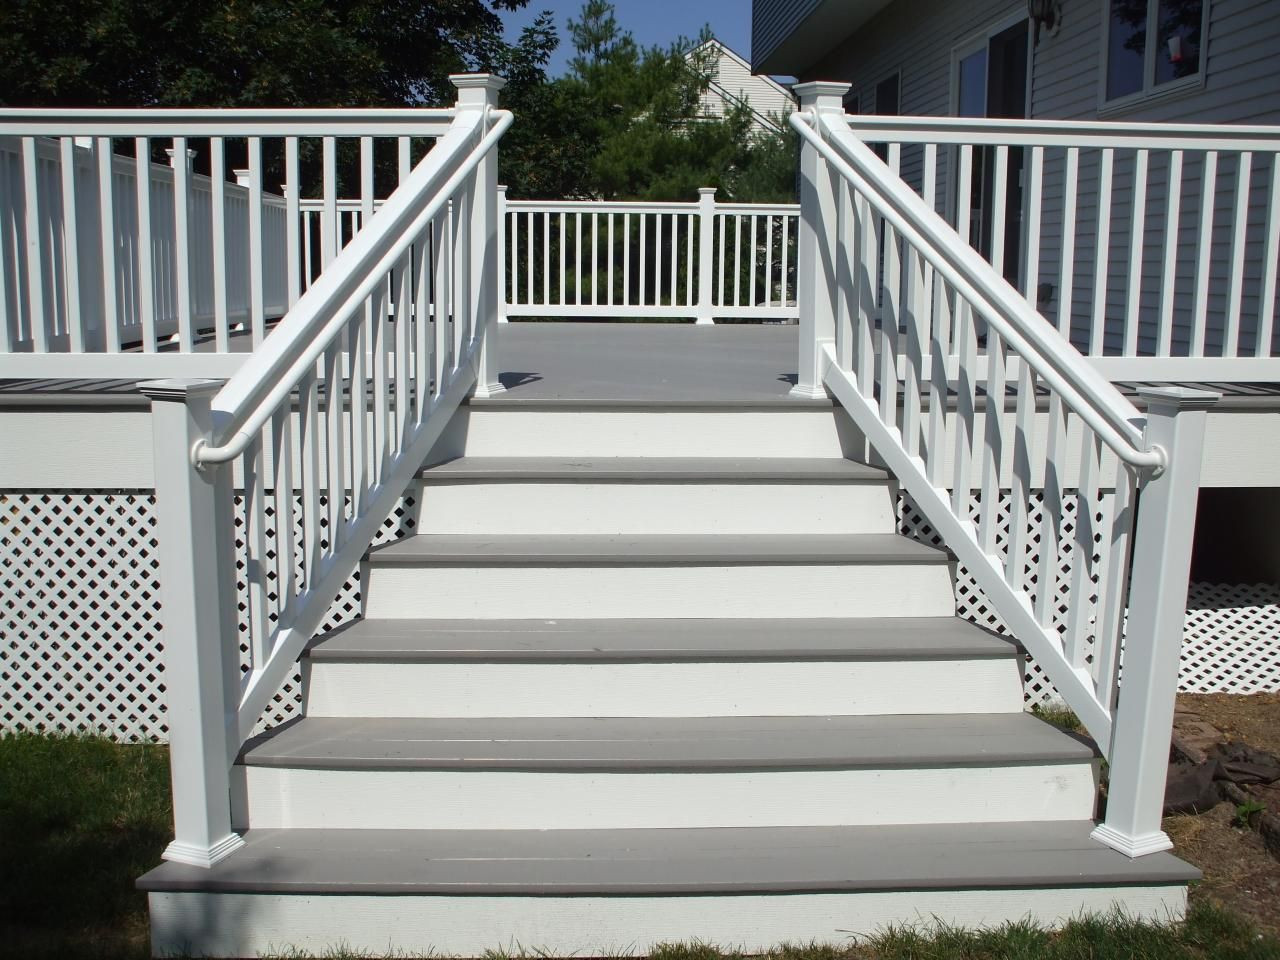 Paint Deck Railing White
 Gray Deck with White Railings Railing posts and White